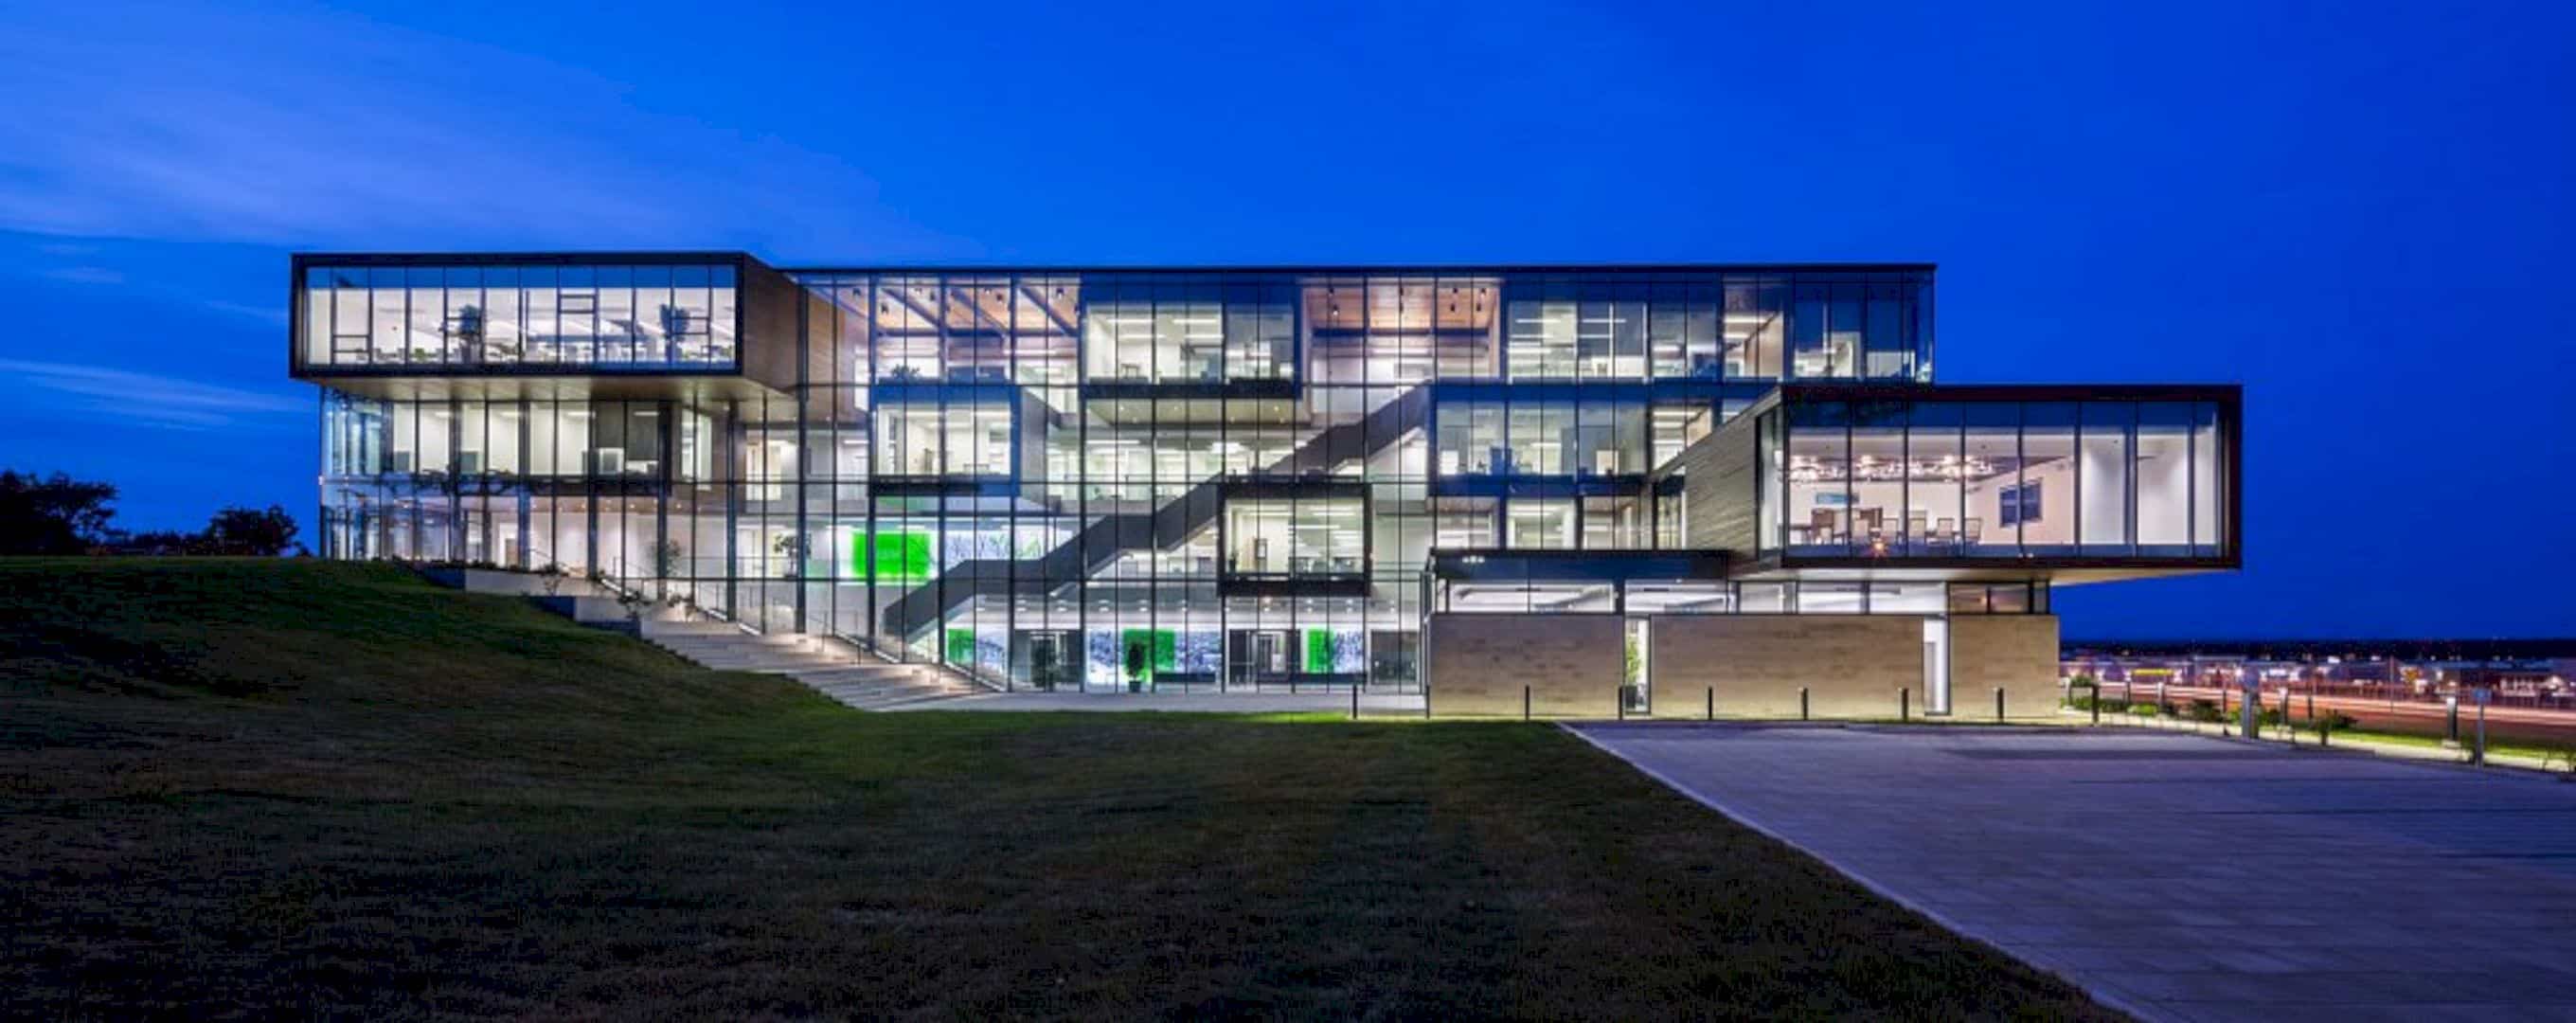 Desjardins Group Headquarters An Architectural Approach Combining Historical Value And Modernism Of Desjardins 7